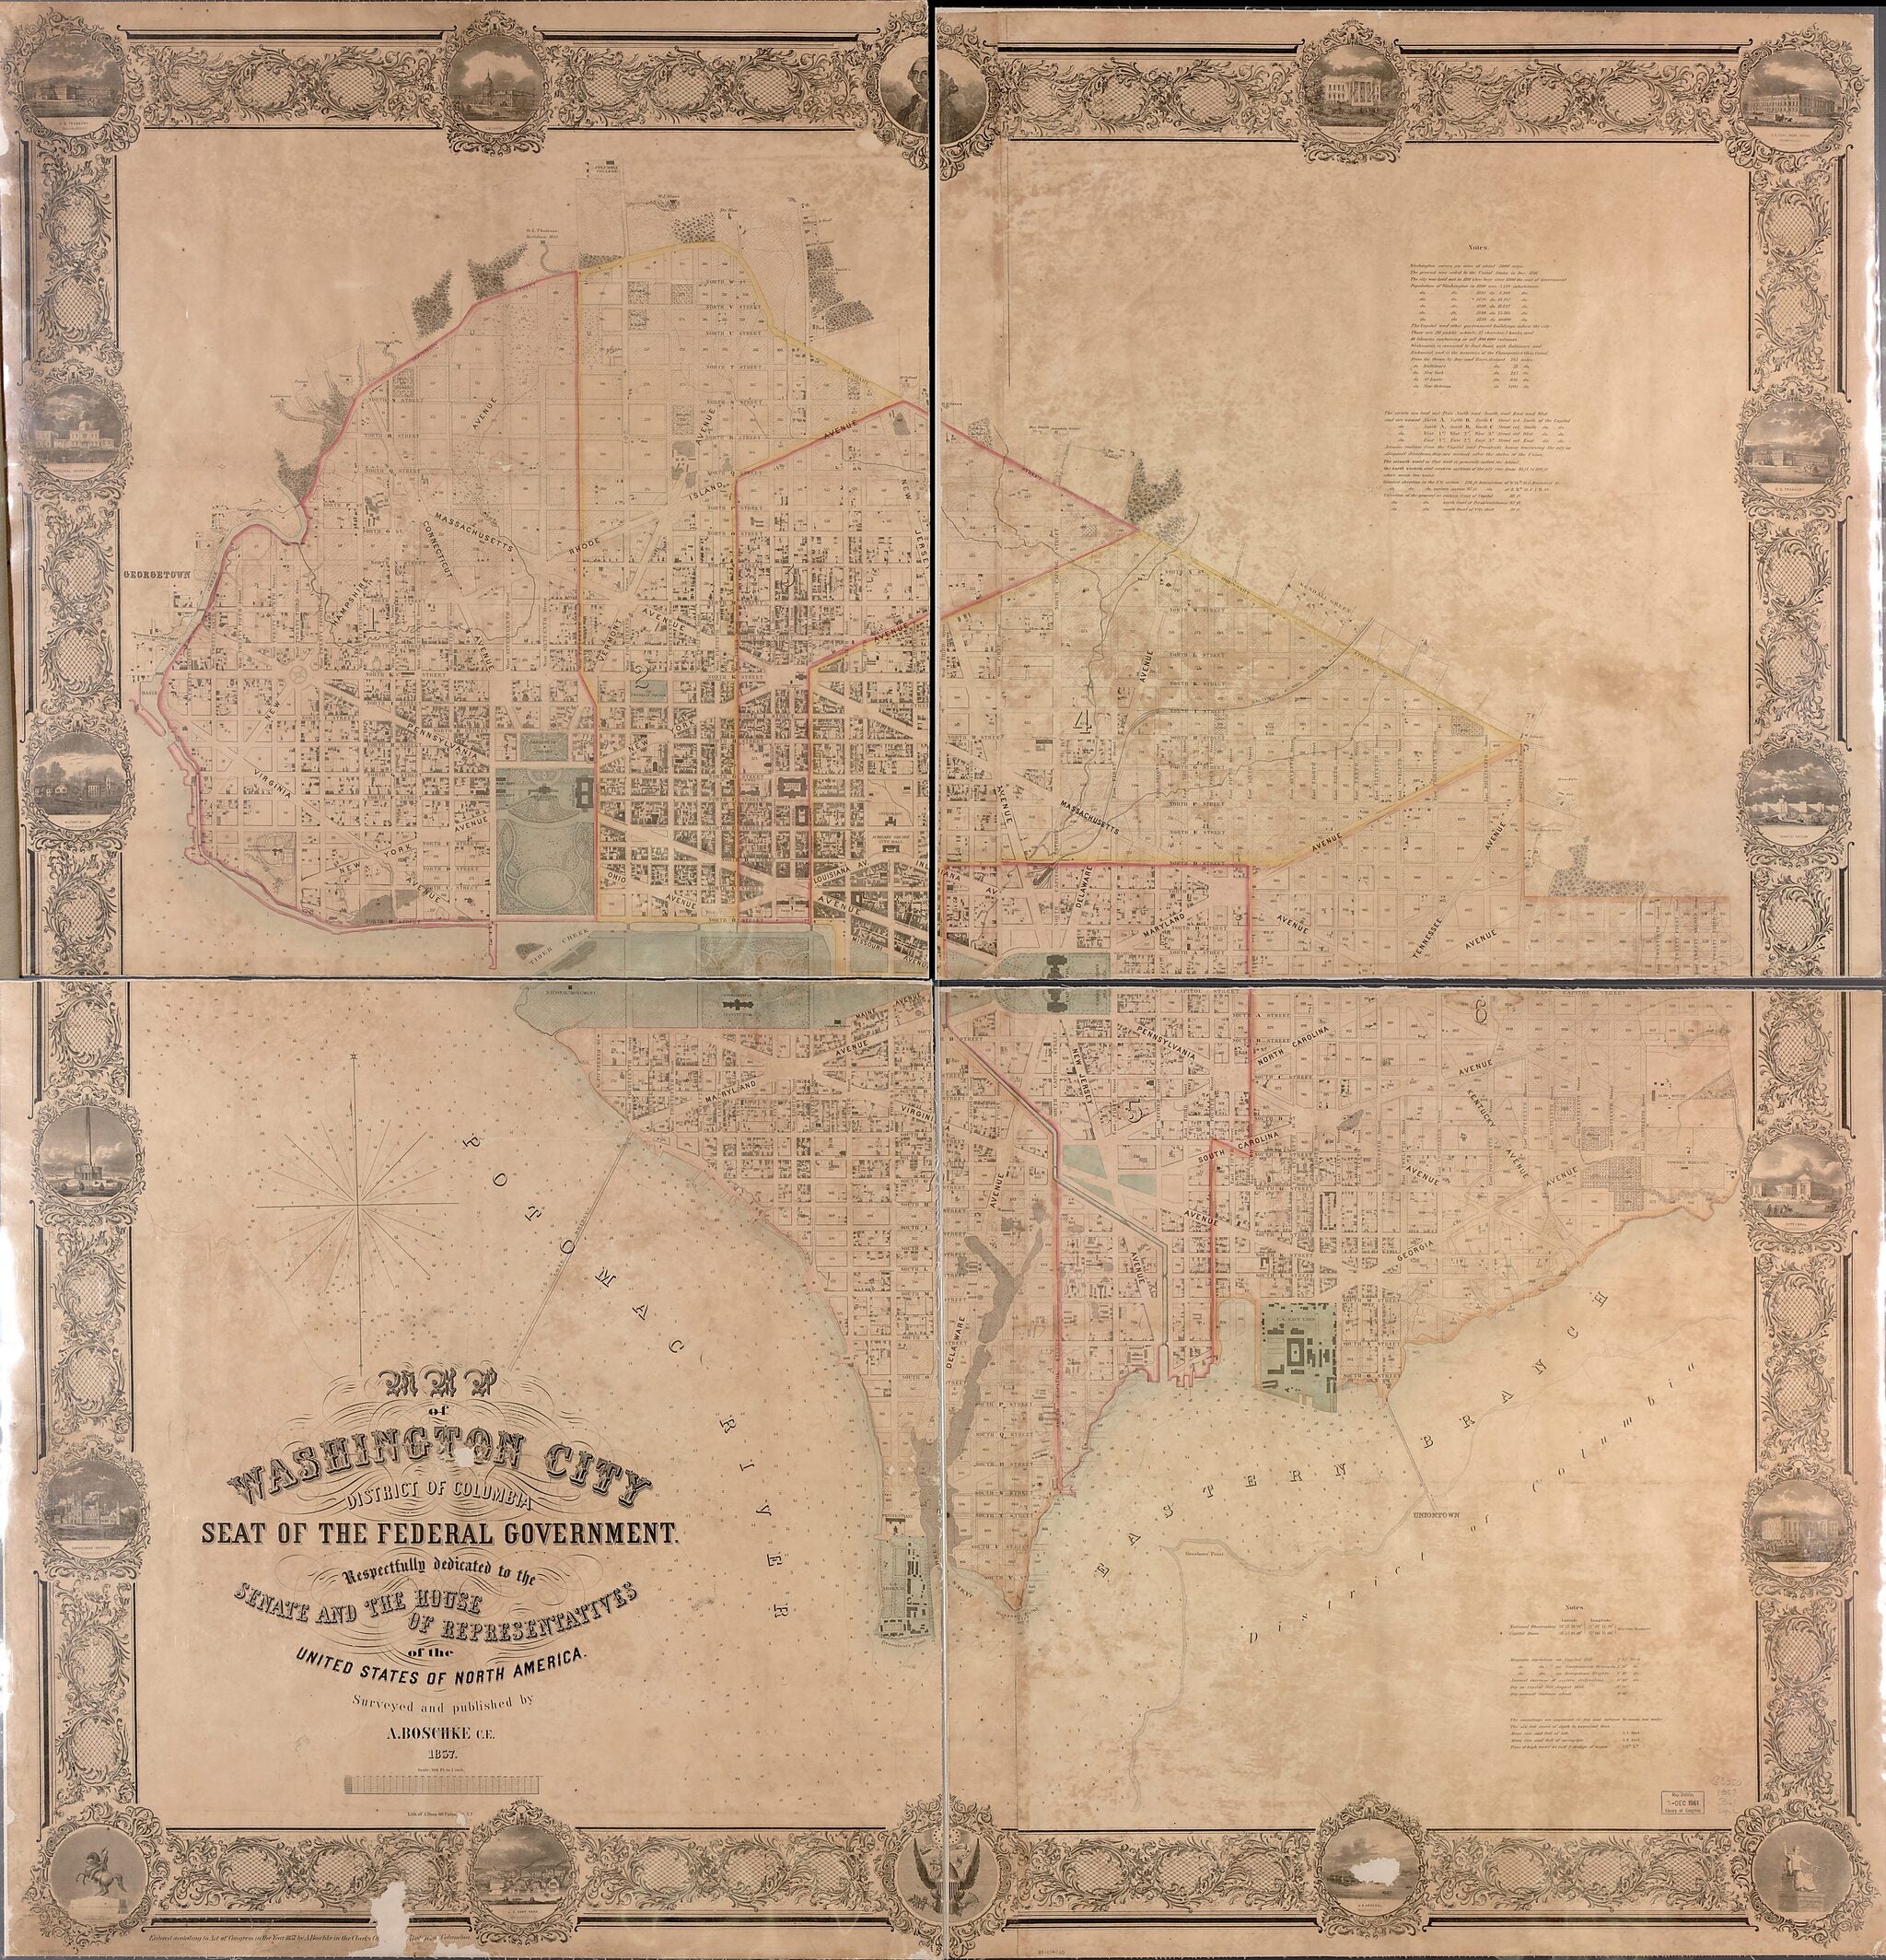 This old map of Map of Washington City, District of Columbia, Seat of the Federal Government : Respectfully Dedicated to the Senate and the House of Representatives of the United States of North America from 1857 was created by Julius Bien, A. Boschke in